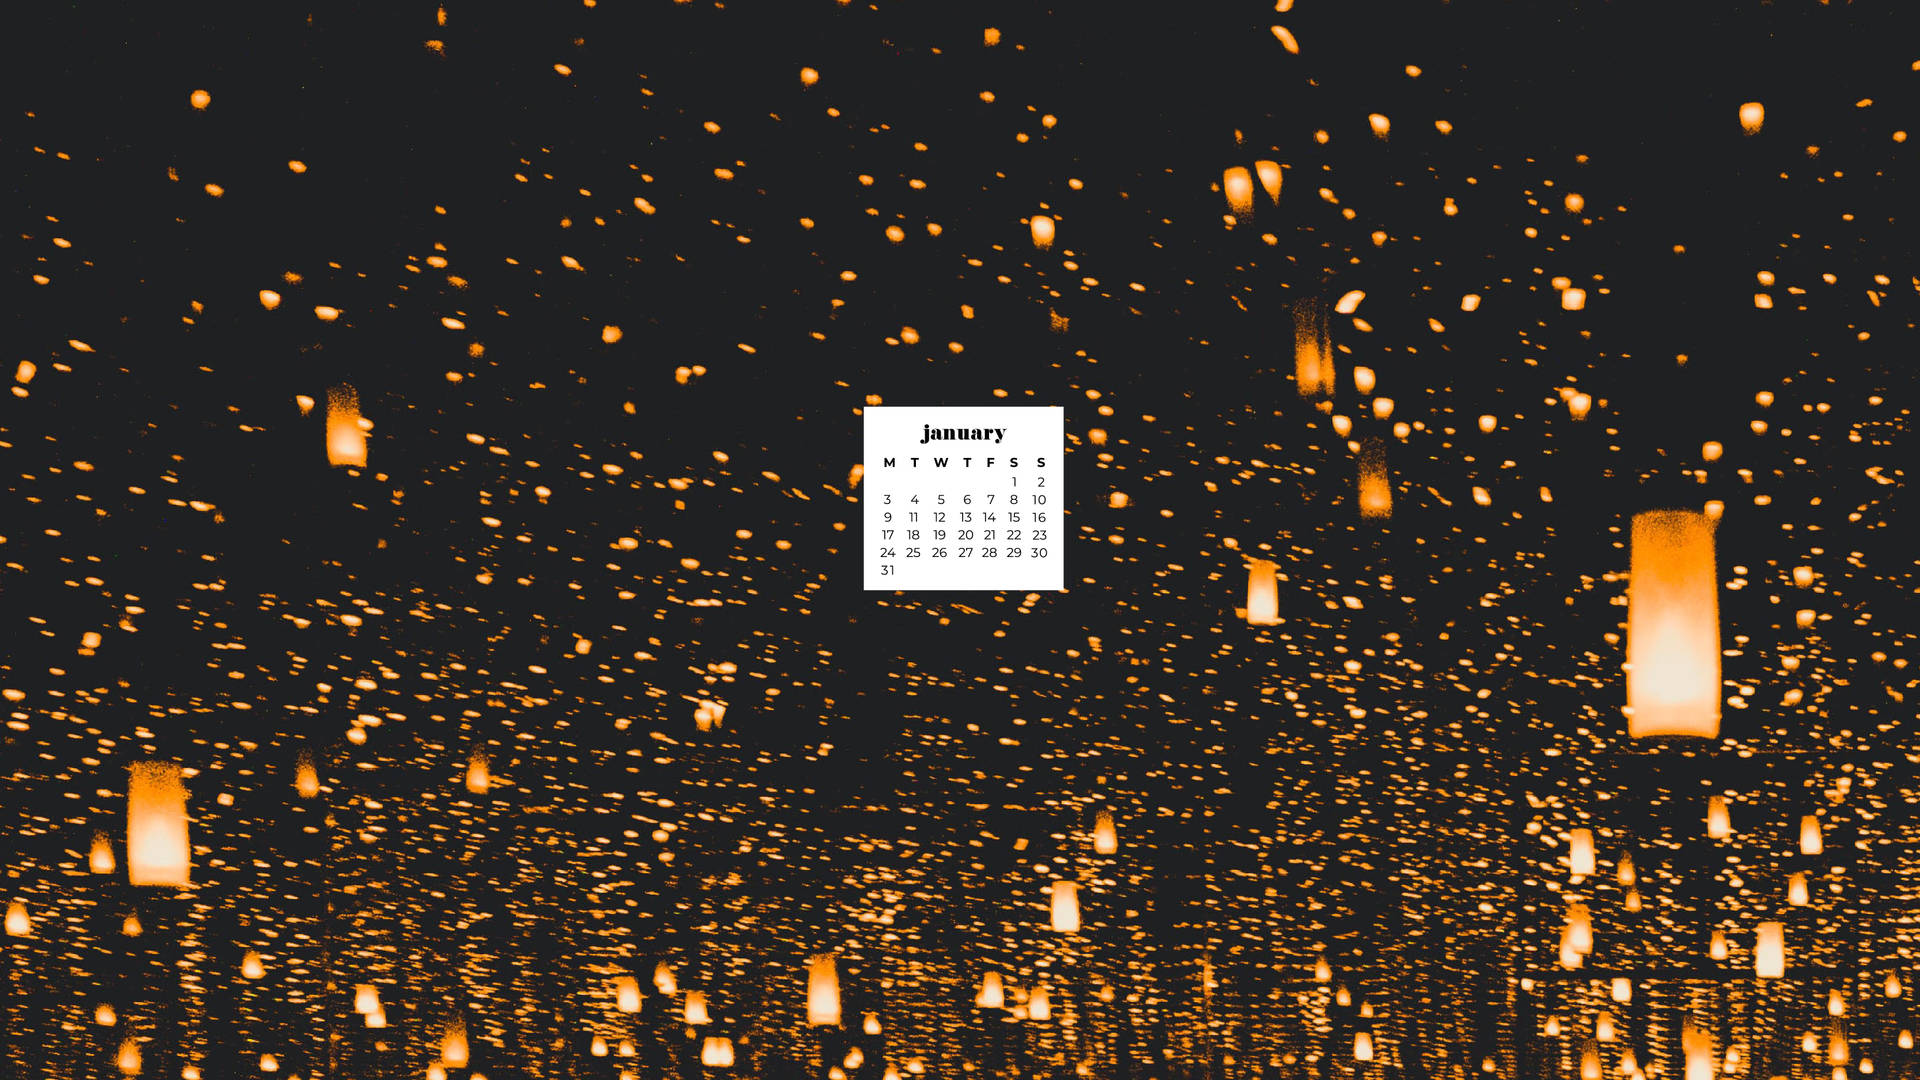 Embrace The New Year With The January 2022 Calendar, Decorated With Beautiful Lanterns.